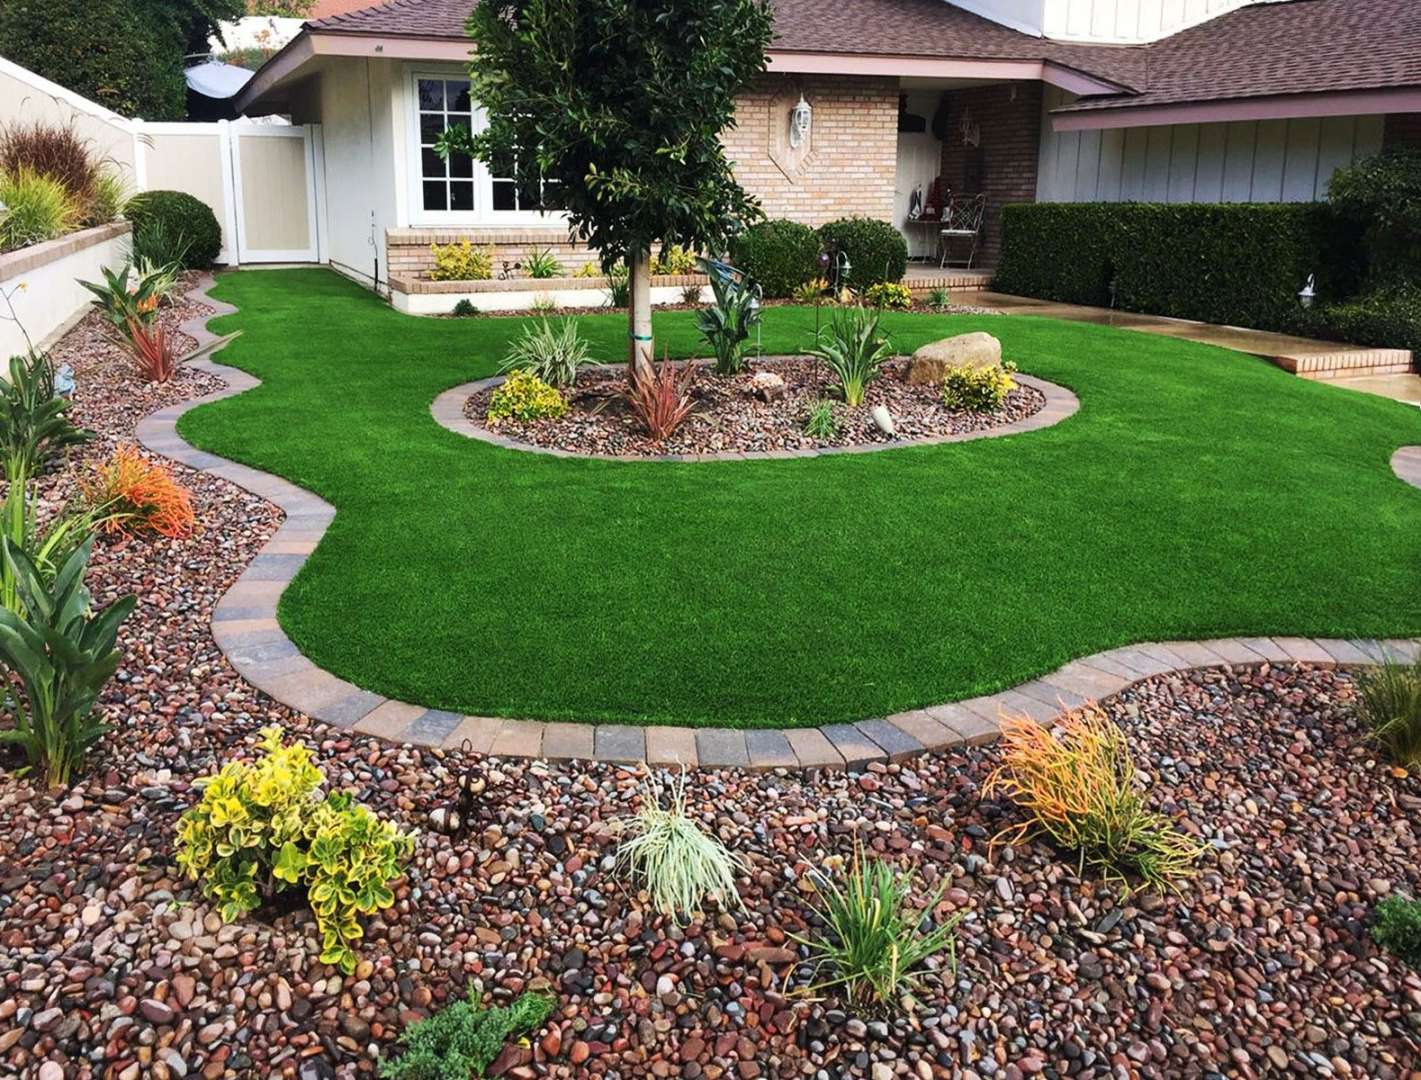 Attention San Diego Homeowners! Get your new Artificial Grass